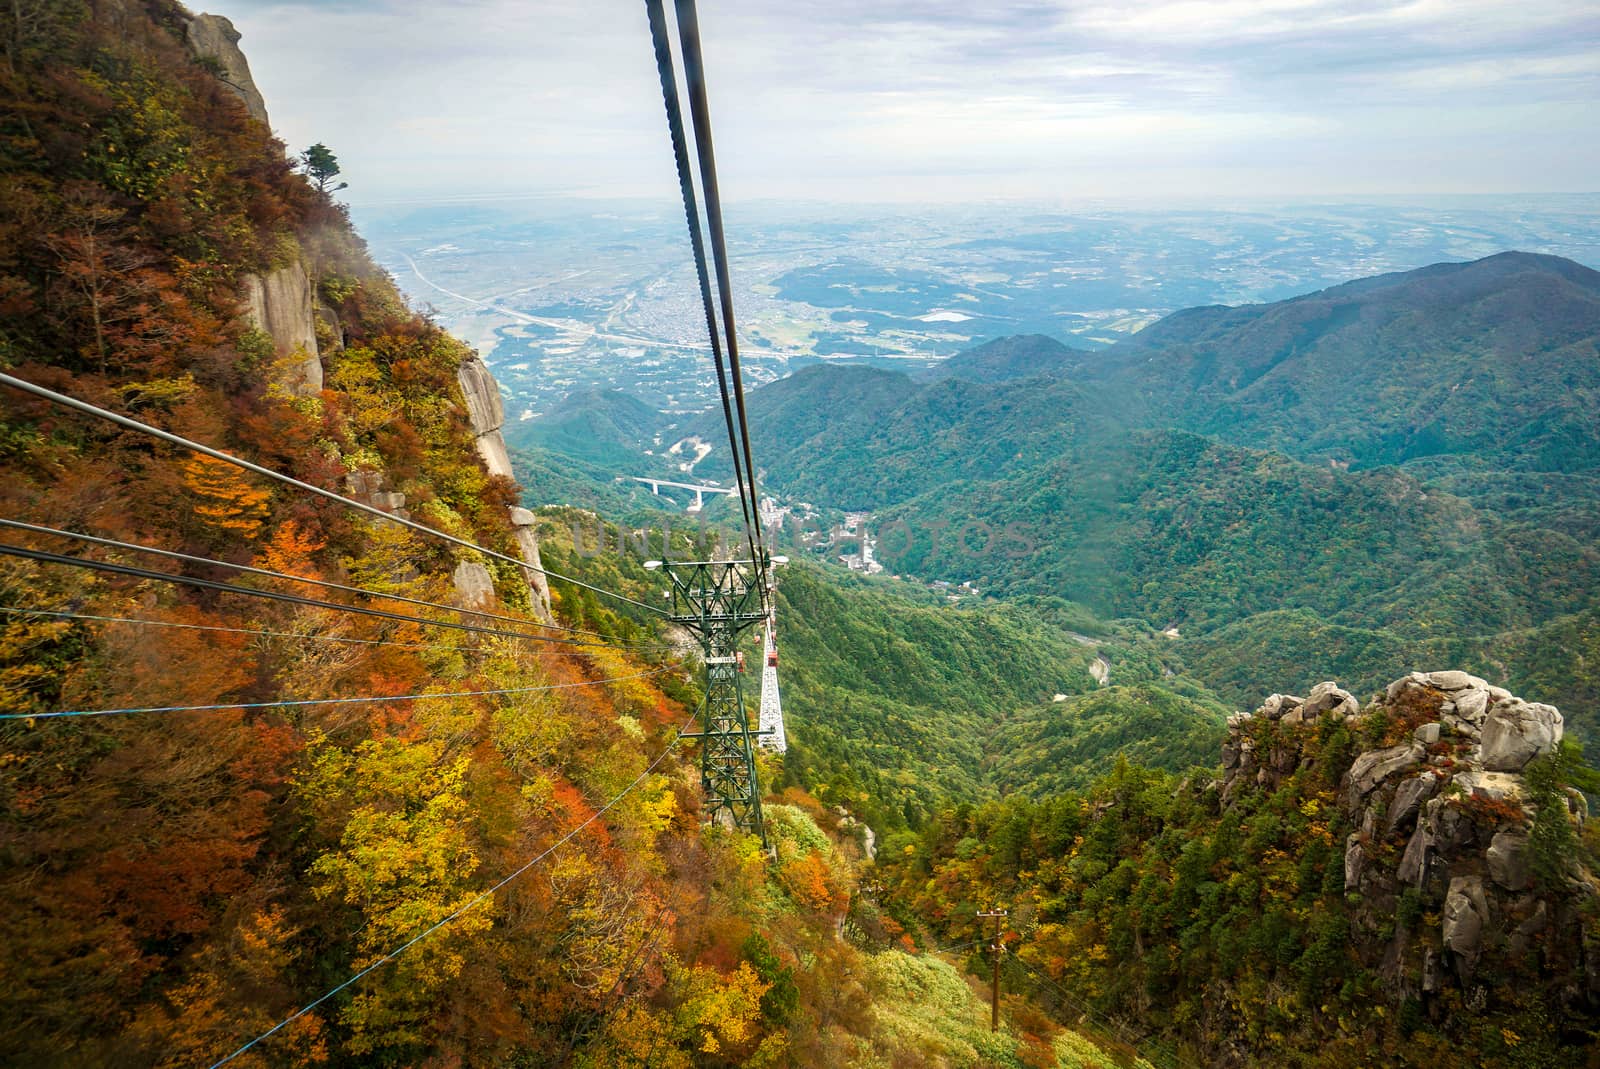 The Gozaisho Ropeway (a Japanese aerial lift line), the line climbs Mount Gozaisho in Komono, Mie. Riders can see a view of Yokkaichi. The mountain itself is known for its beautiful scenery.